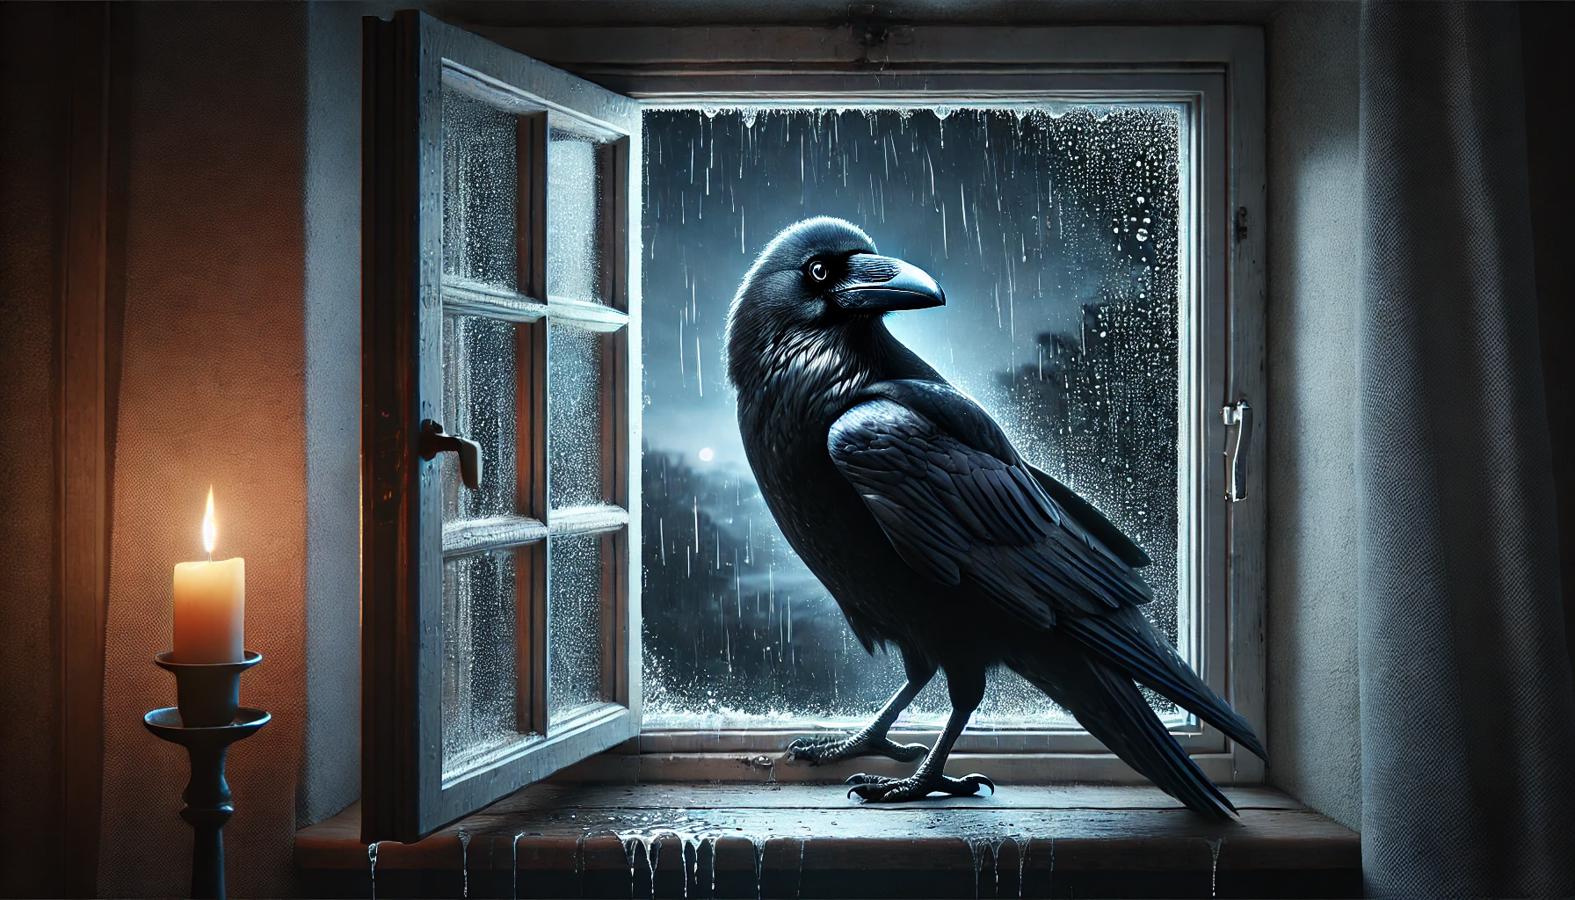 A large black raven perched on a windowsill during a stormy night, rain lashing against the window.